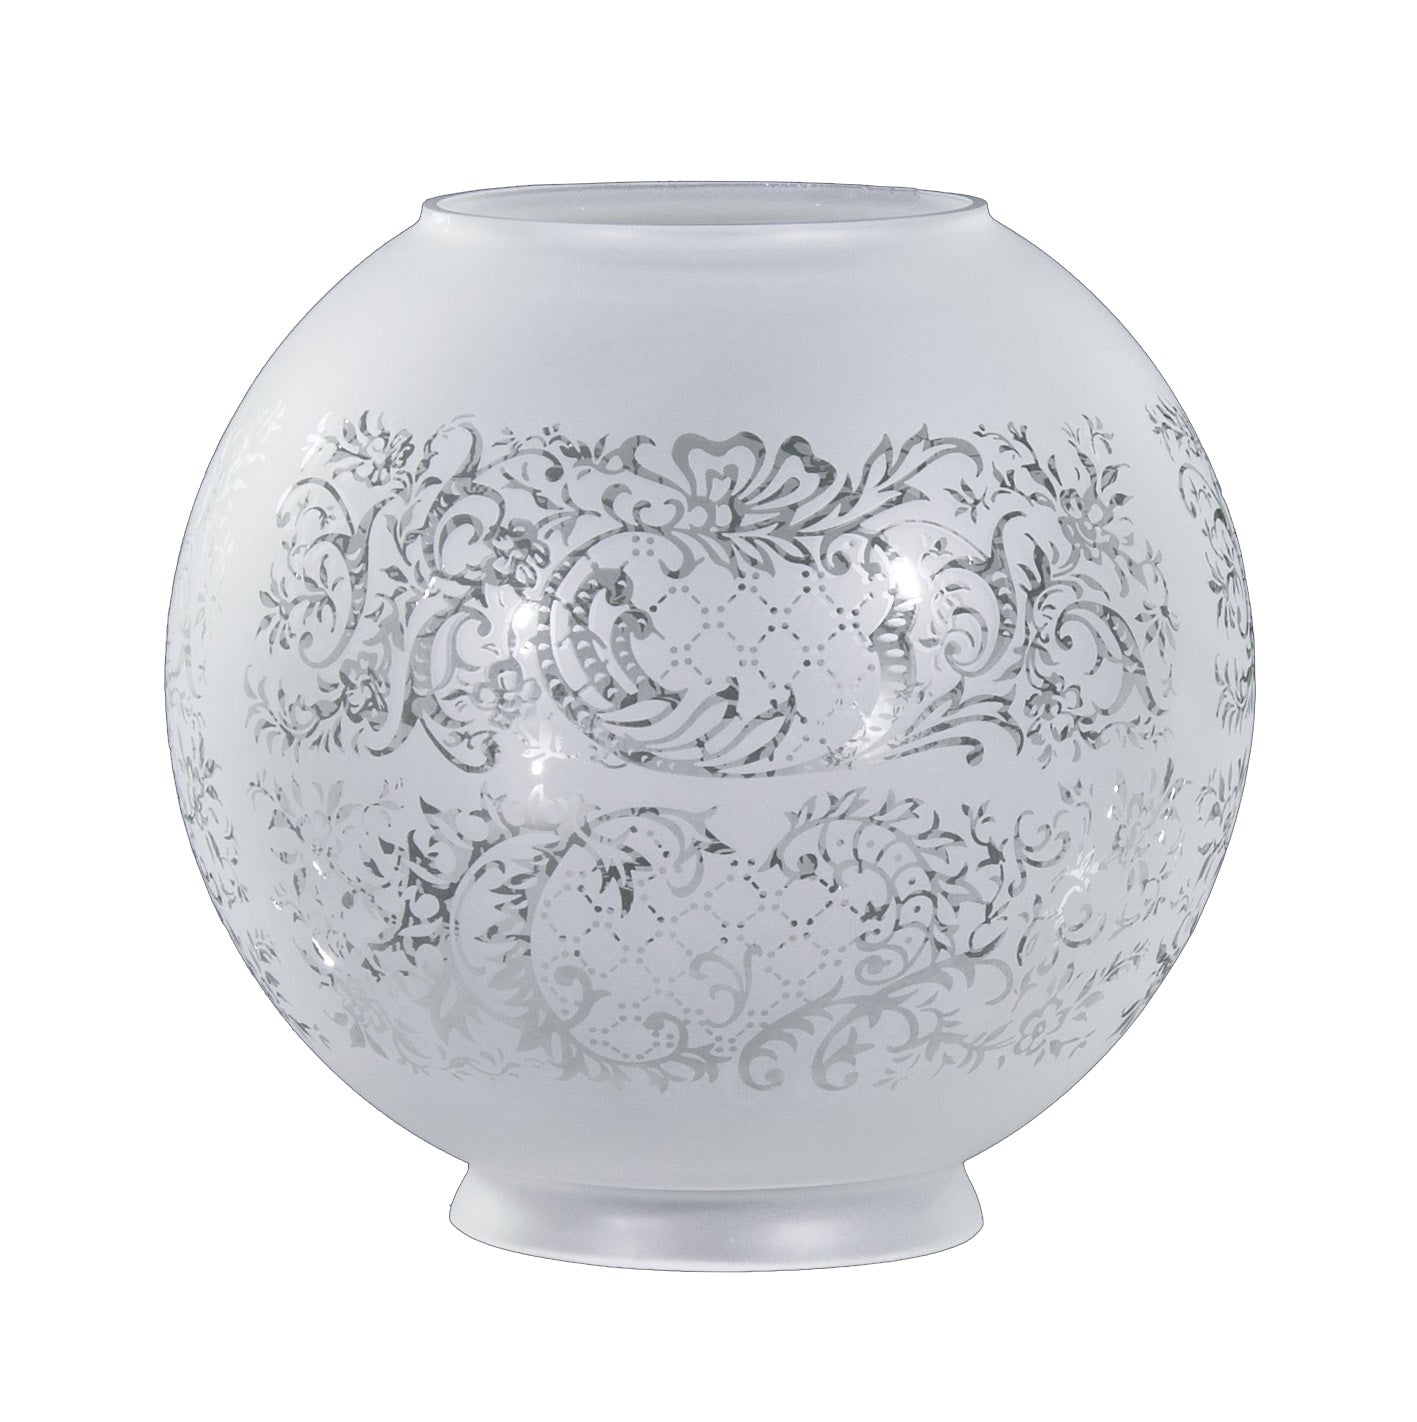 8" Satin Etched Ball Shade, Floral Scene